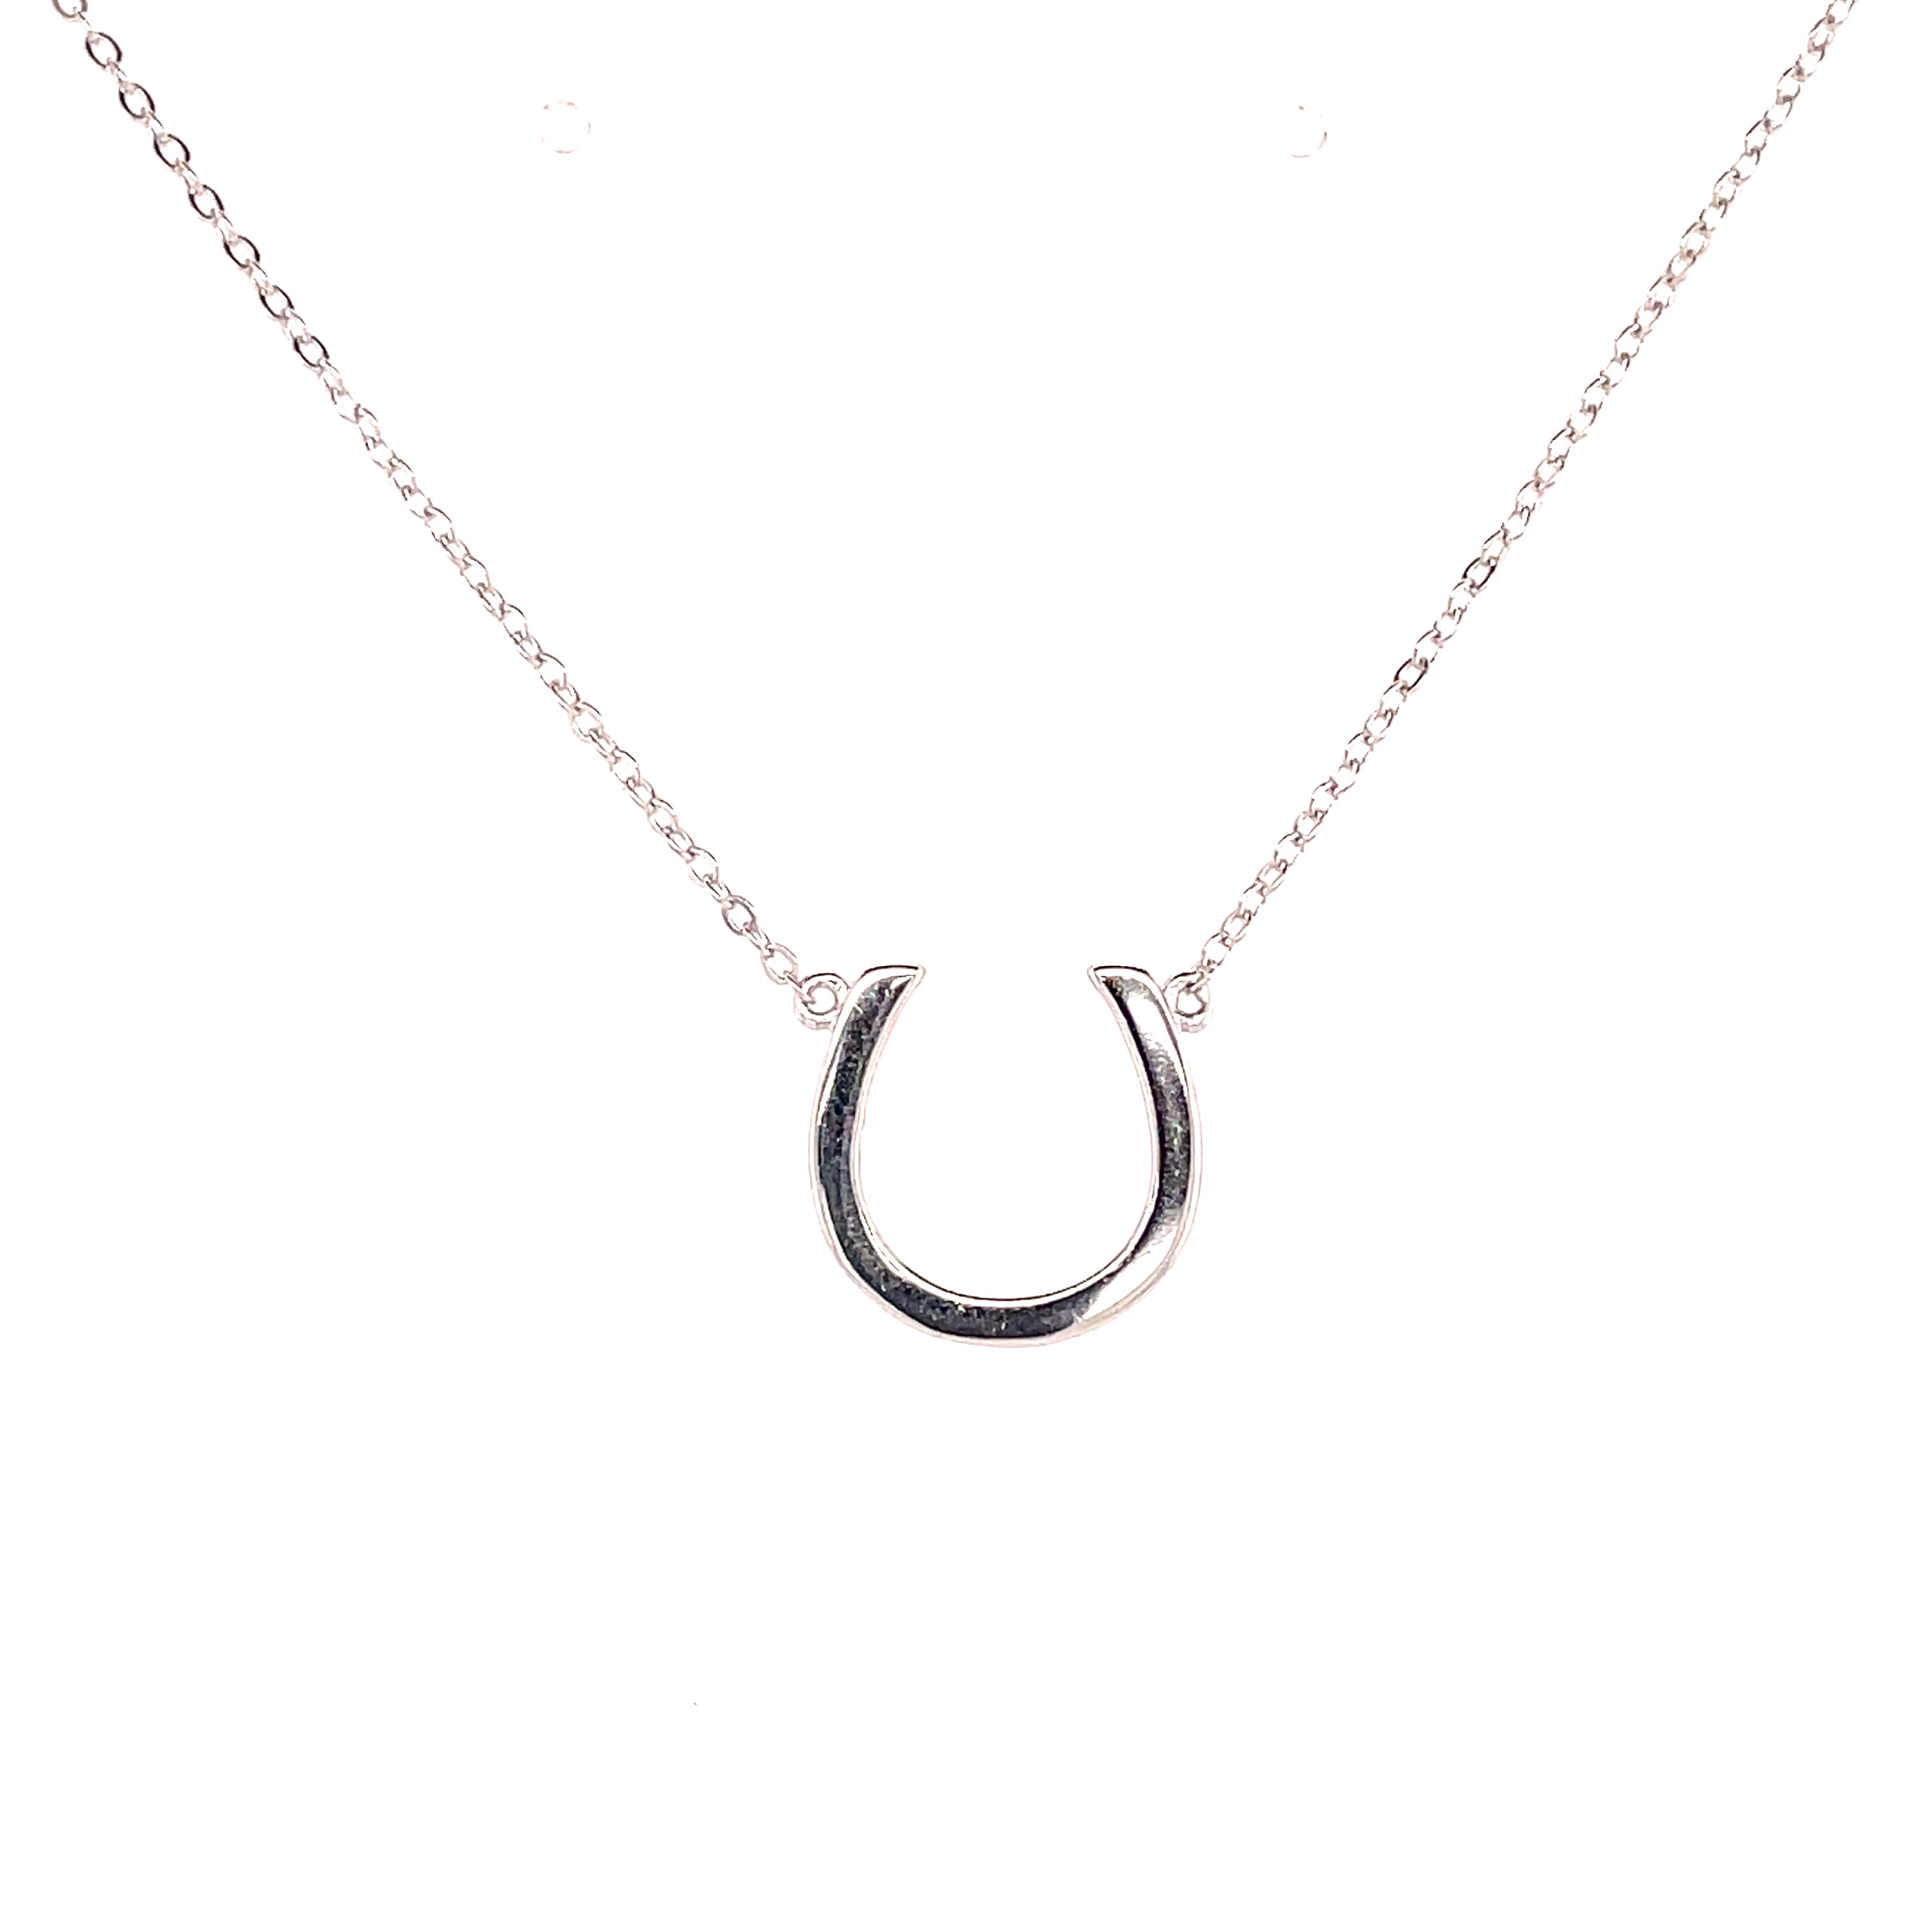 Simple equestrian horseshoe necklace sterling silver